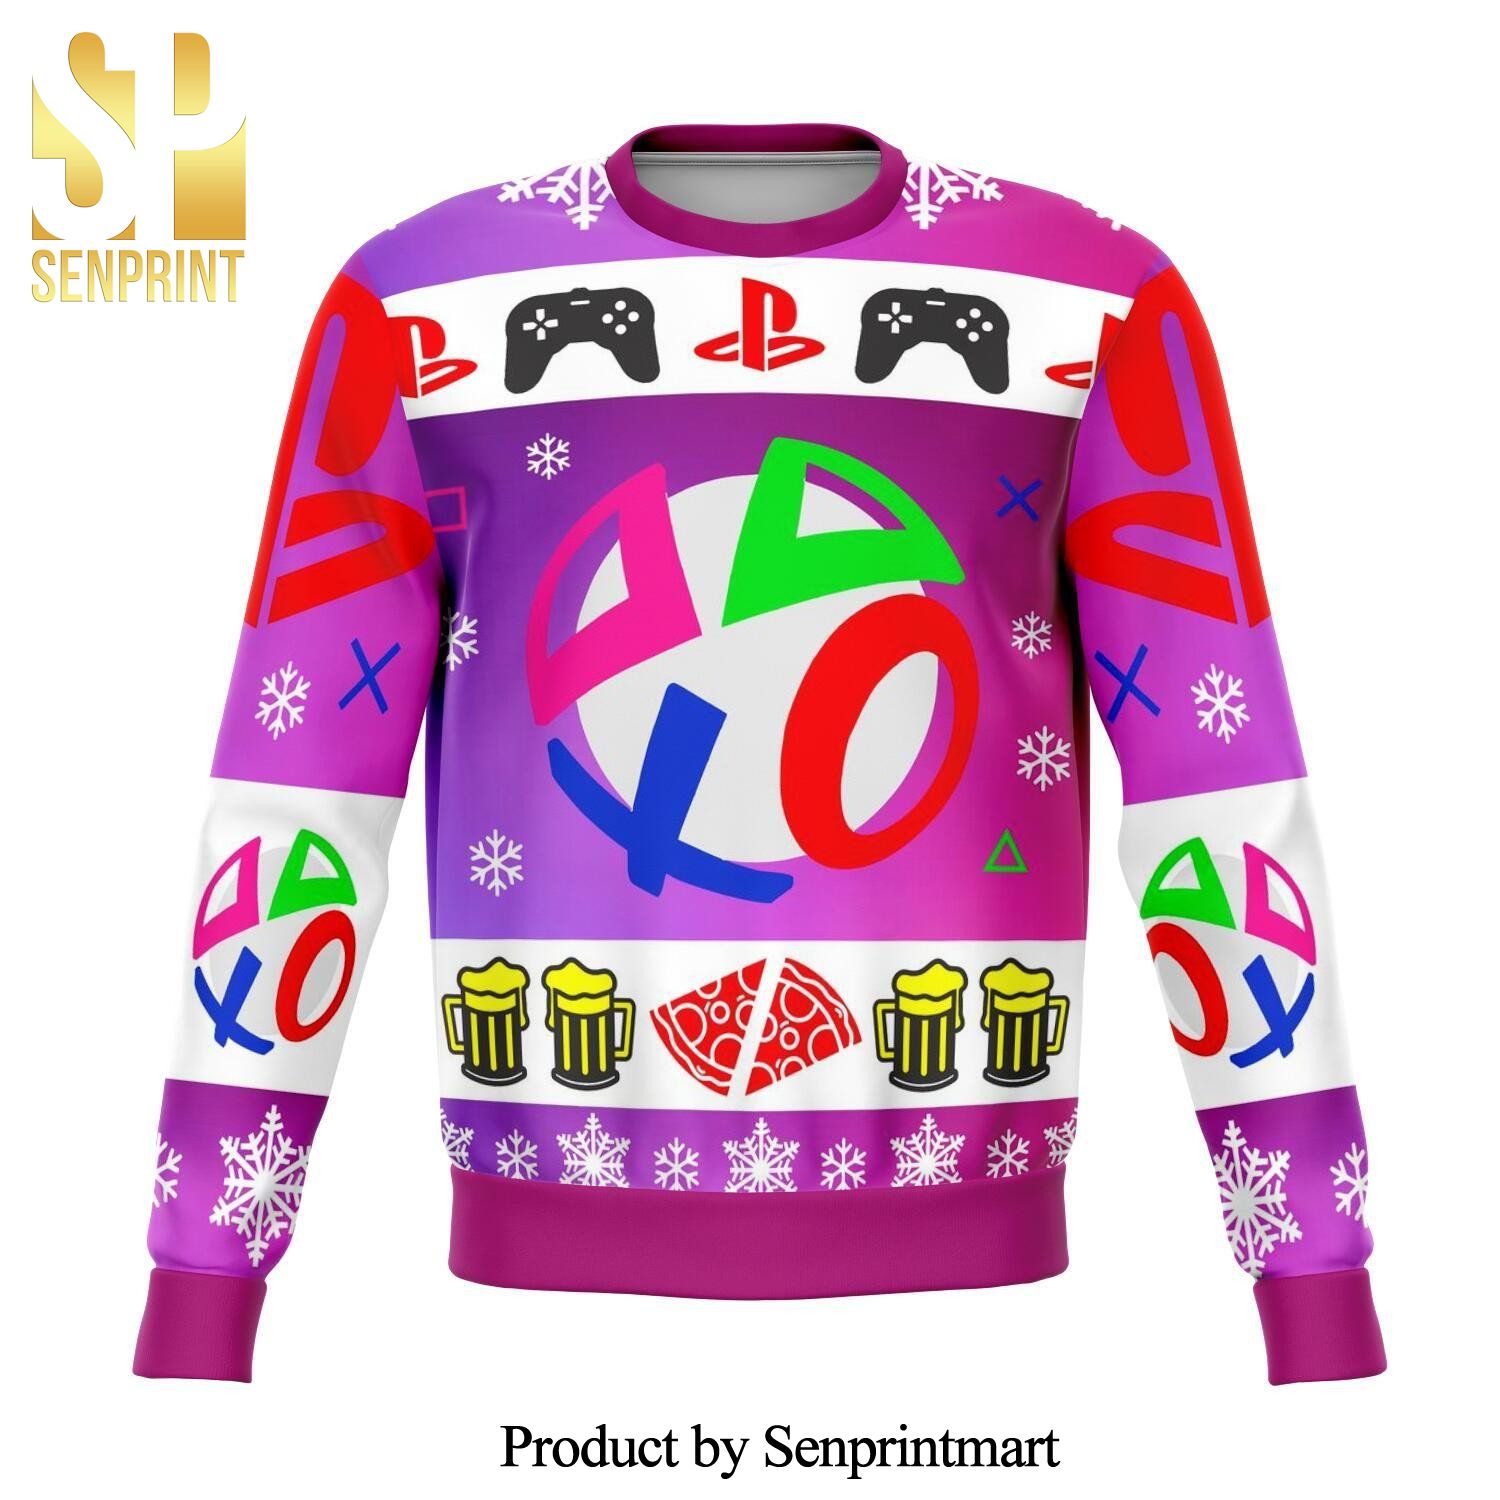 Playstation Premium Knitted Ugly Christmas Sweater – Pink